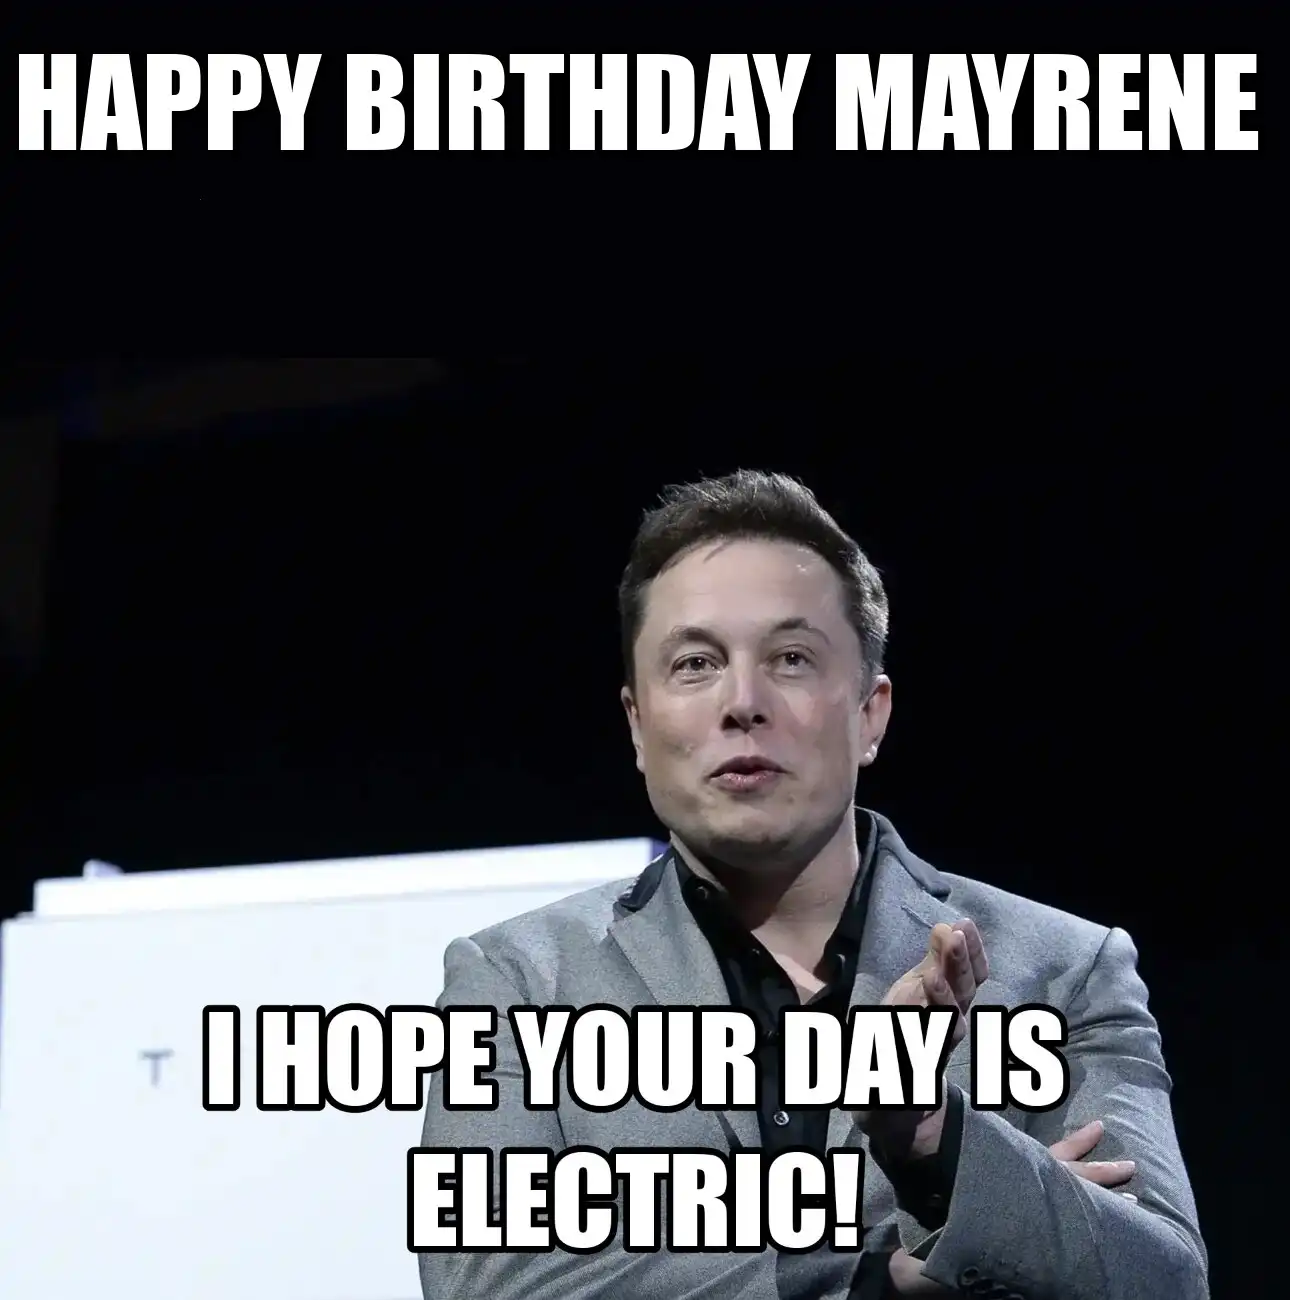 Happy Birthday Mayrene I Hope Your Day Is Electric Meme